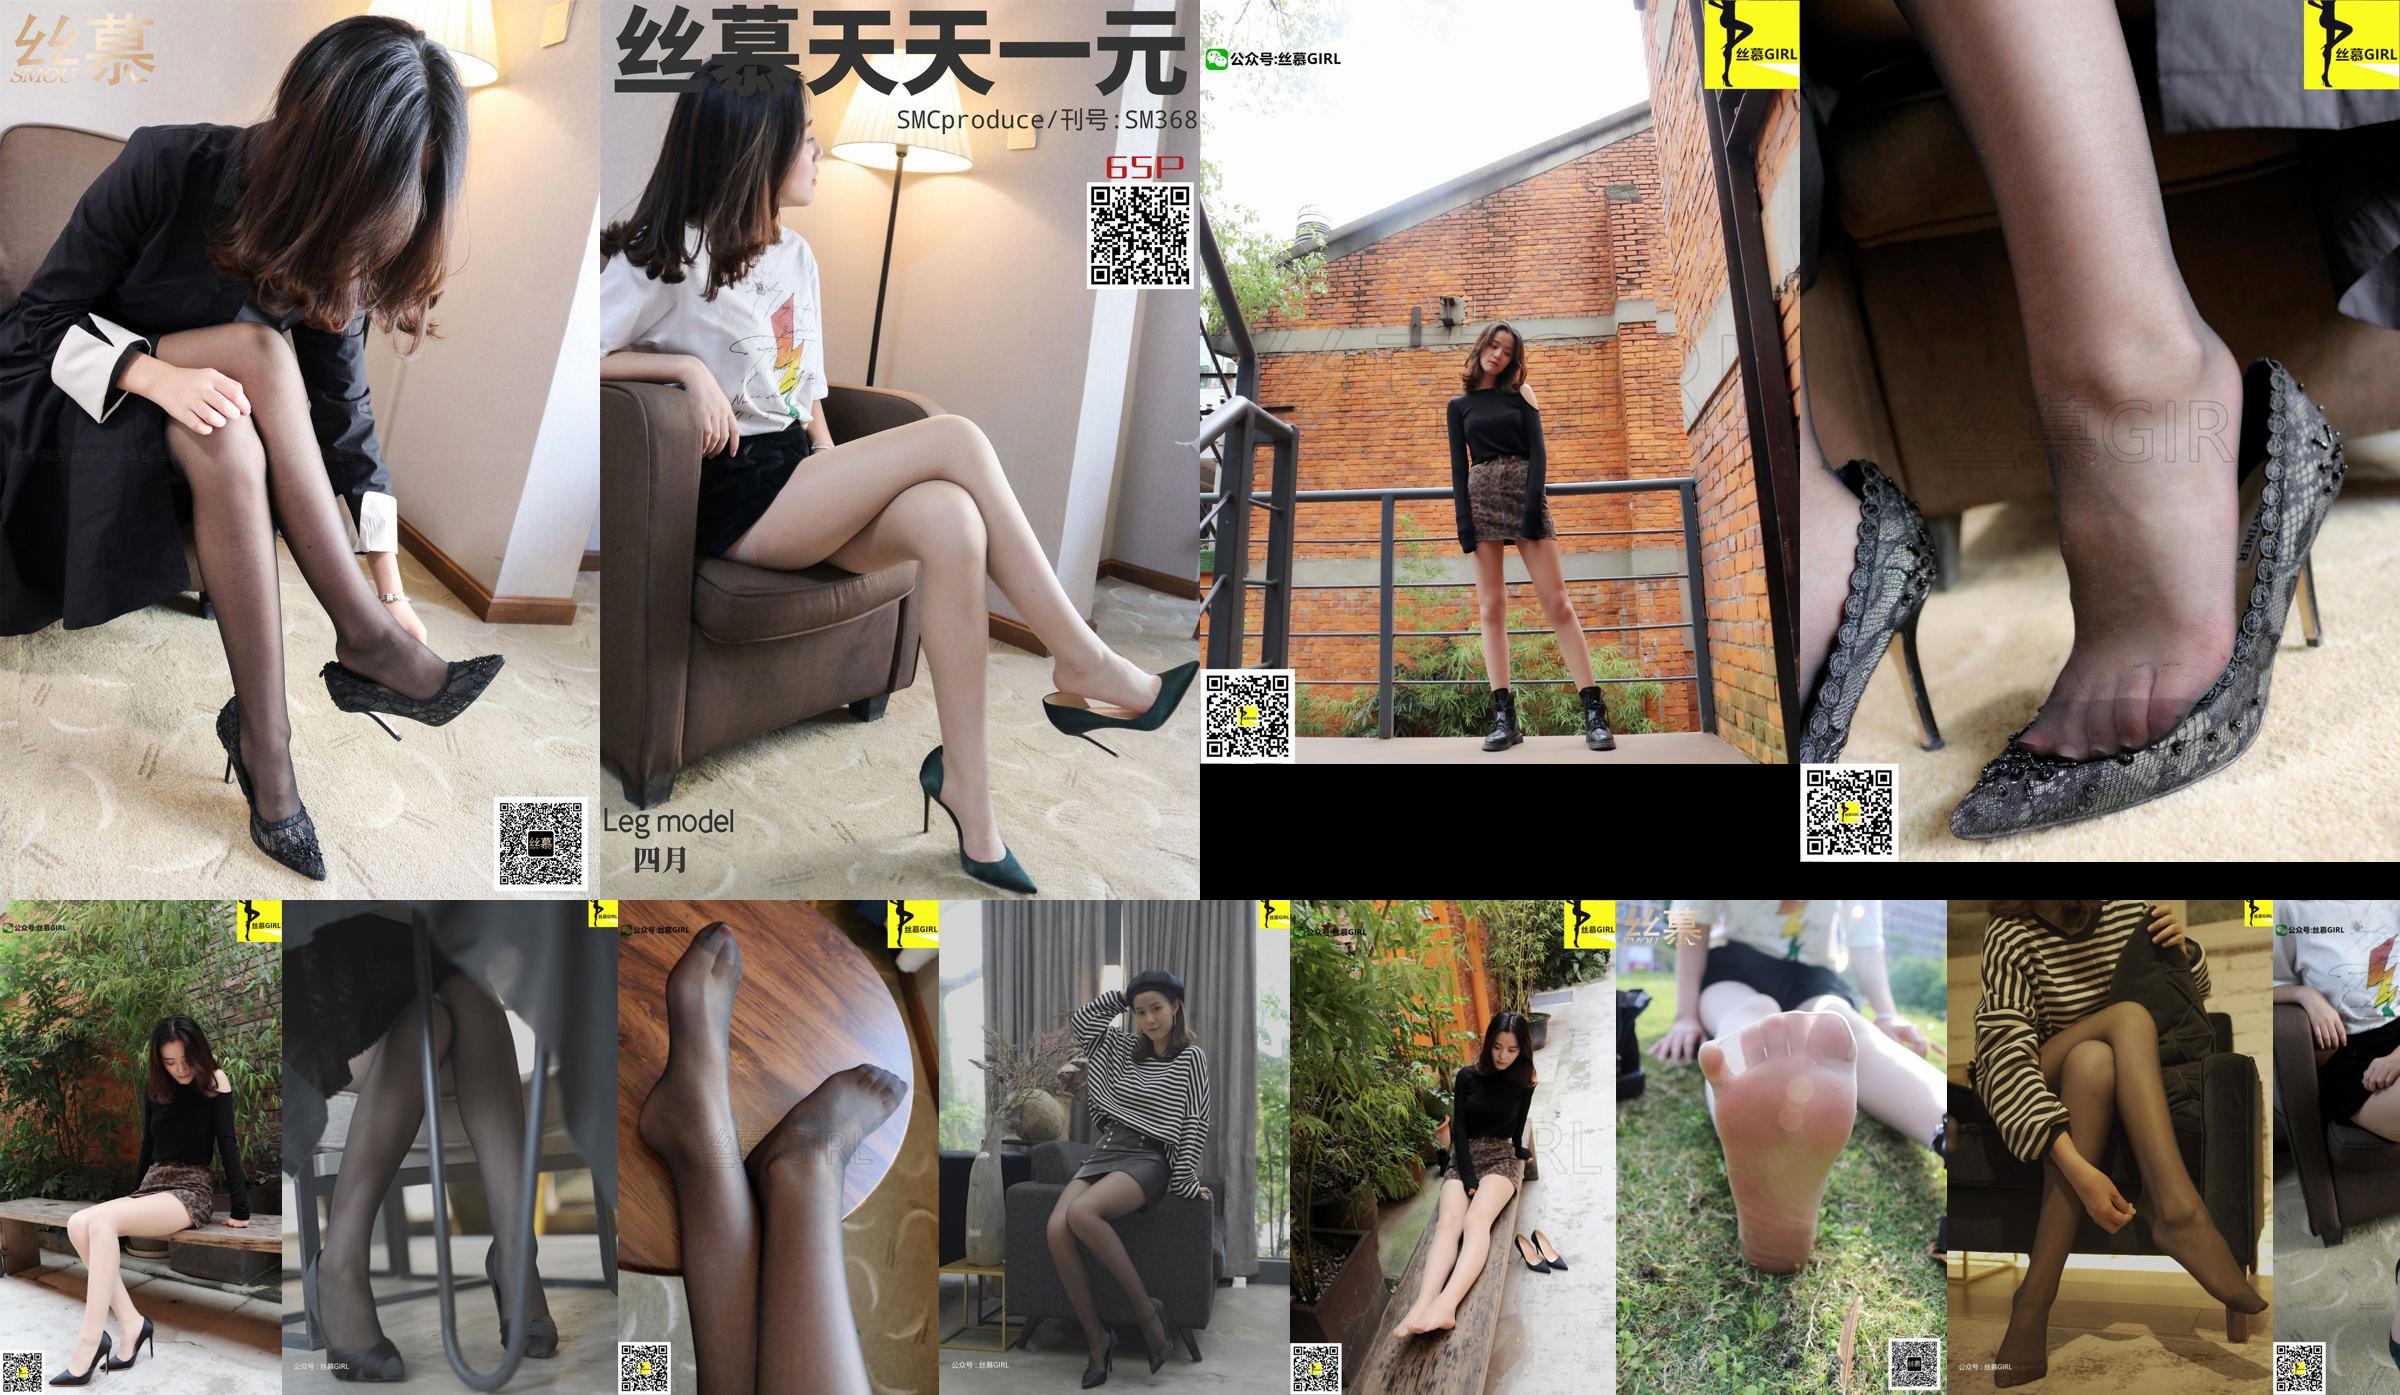 [Simu] SM368 Every Day One Yuan April "Double Silk Review" No.7bc688 Pagina 1